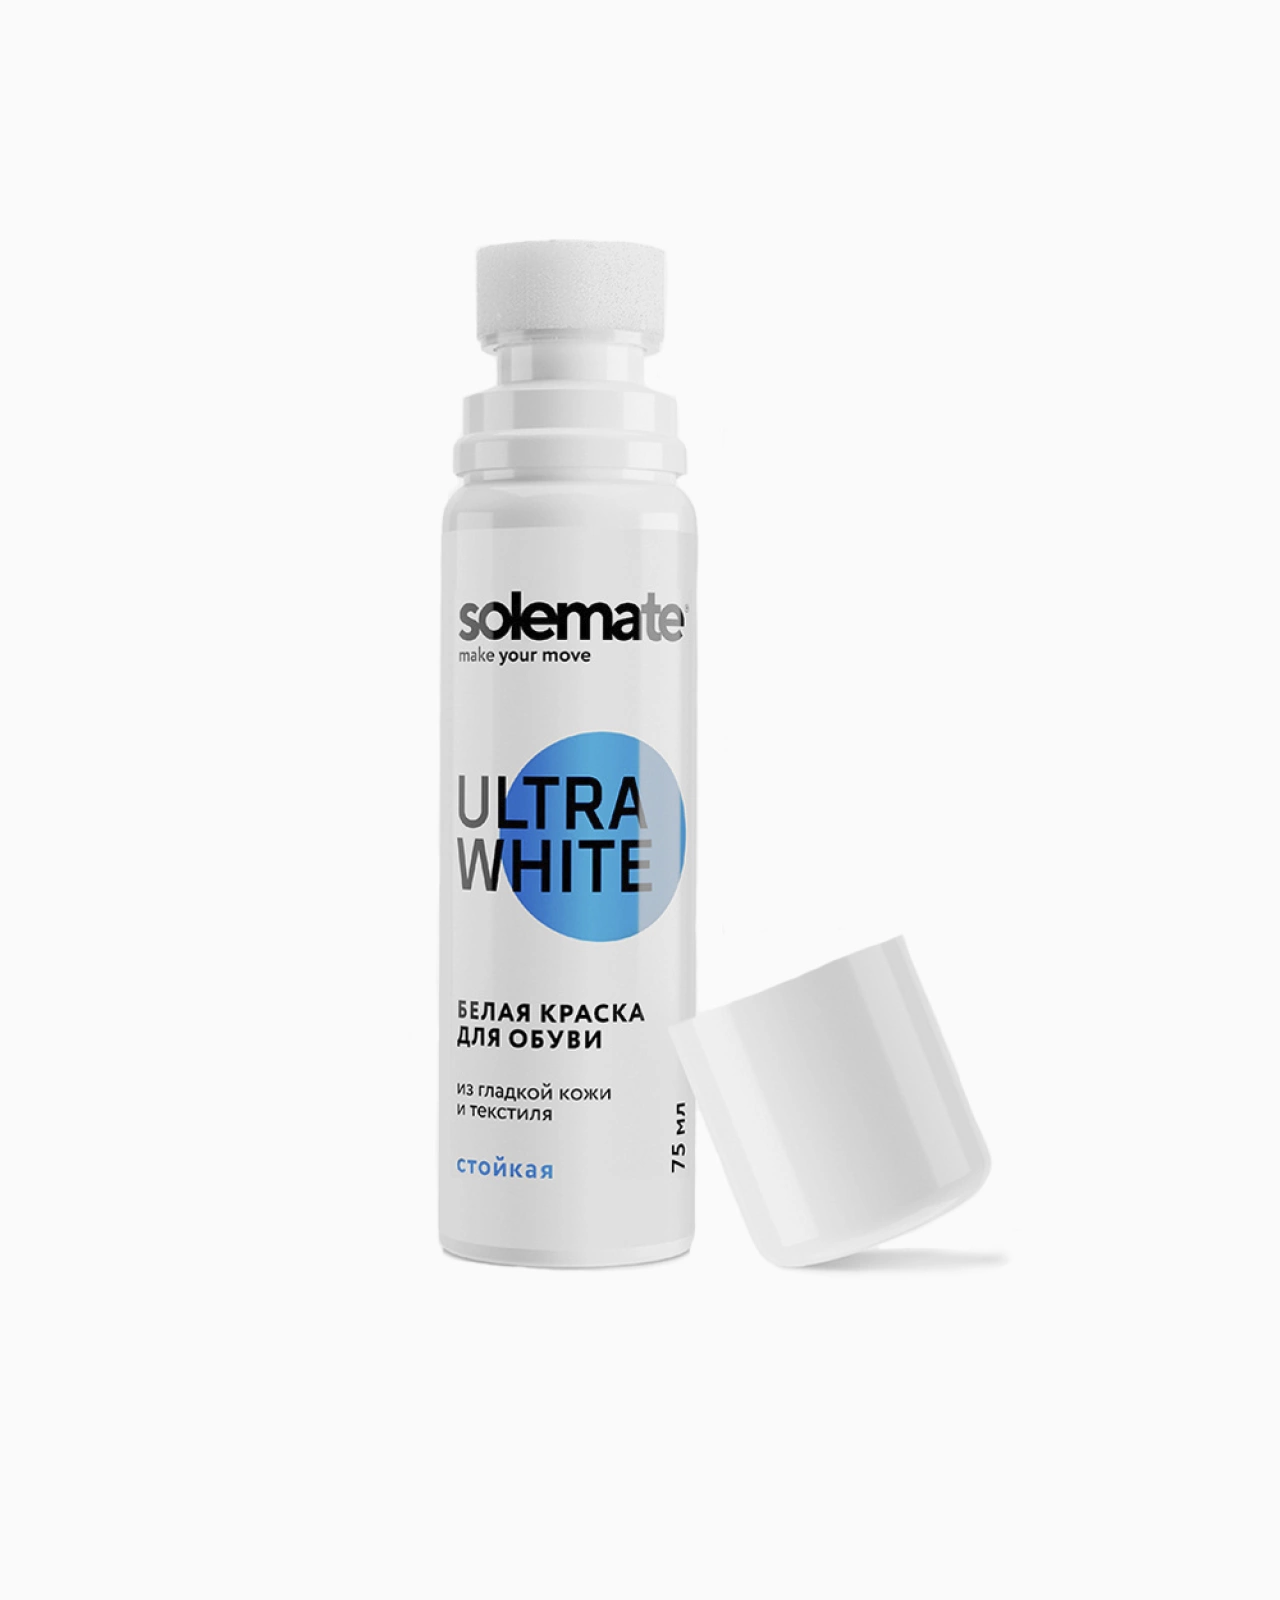 Solemate: Краска для обуви Solemate Ultra White 